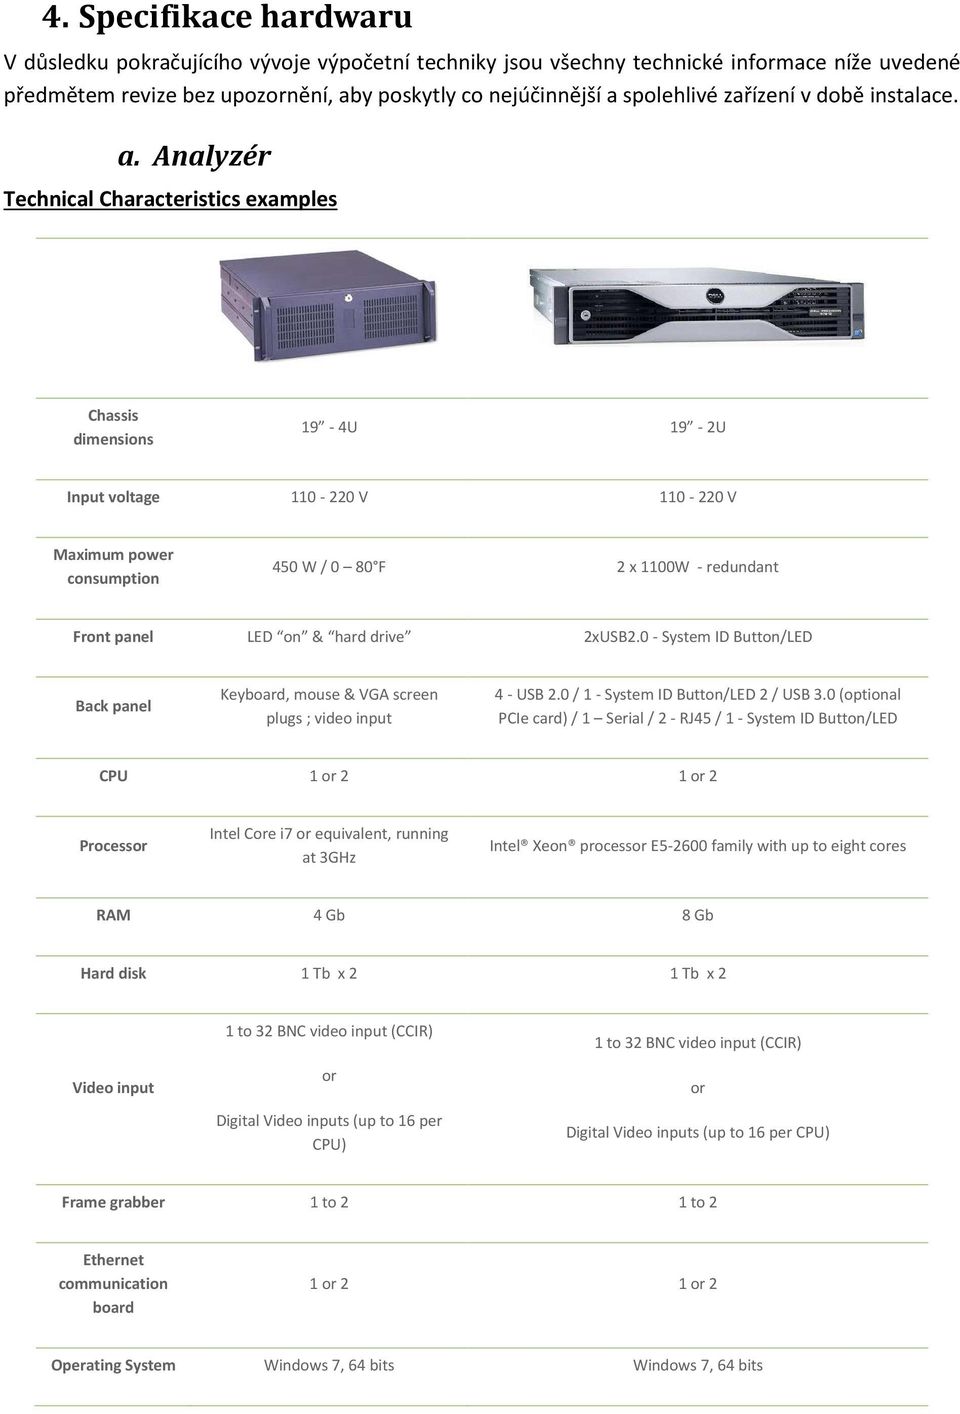 Analyzér Technical Characteristics examples Chassis dimensions 19-4U 19-2U Input voltage 110-220 V 110-220 V Maximum power consumption 450 W / 0 80 F 2 x 1100W - redundant Front panel LED on & hard